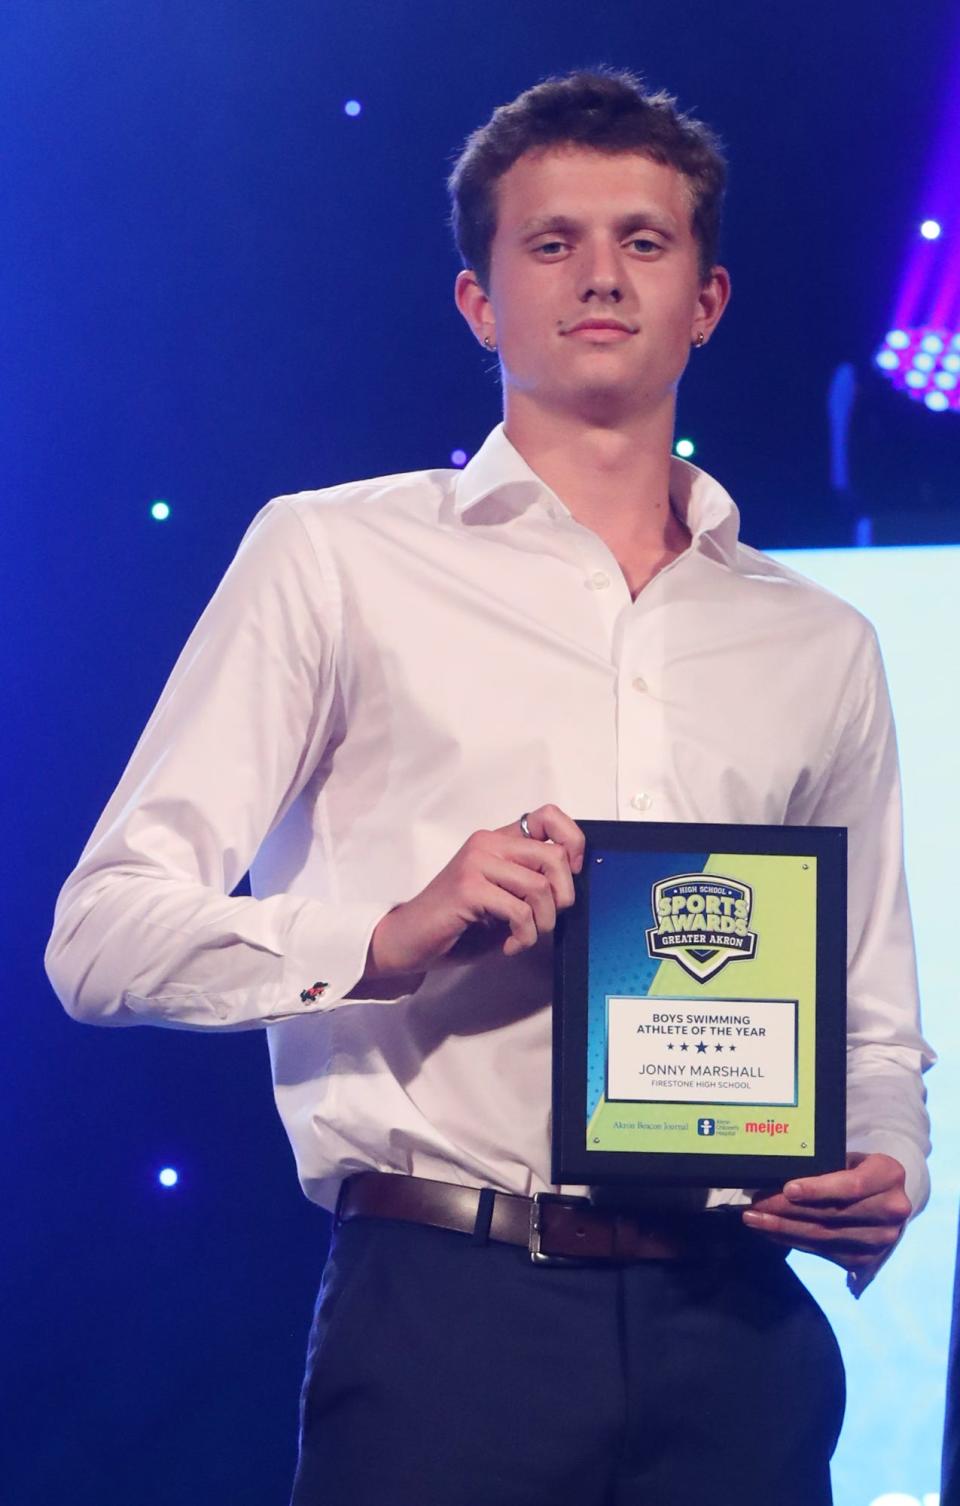 Firestone High's Jonny Marshall Greater Akron Boys Swimming and Diving Player of the Year at the High School Sports All-Star Awards at the Civic Theatre in Akron on Friday.